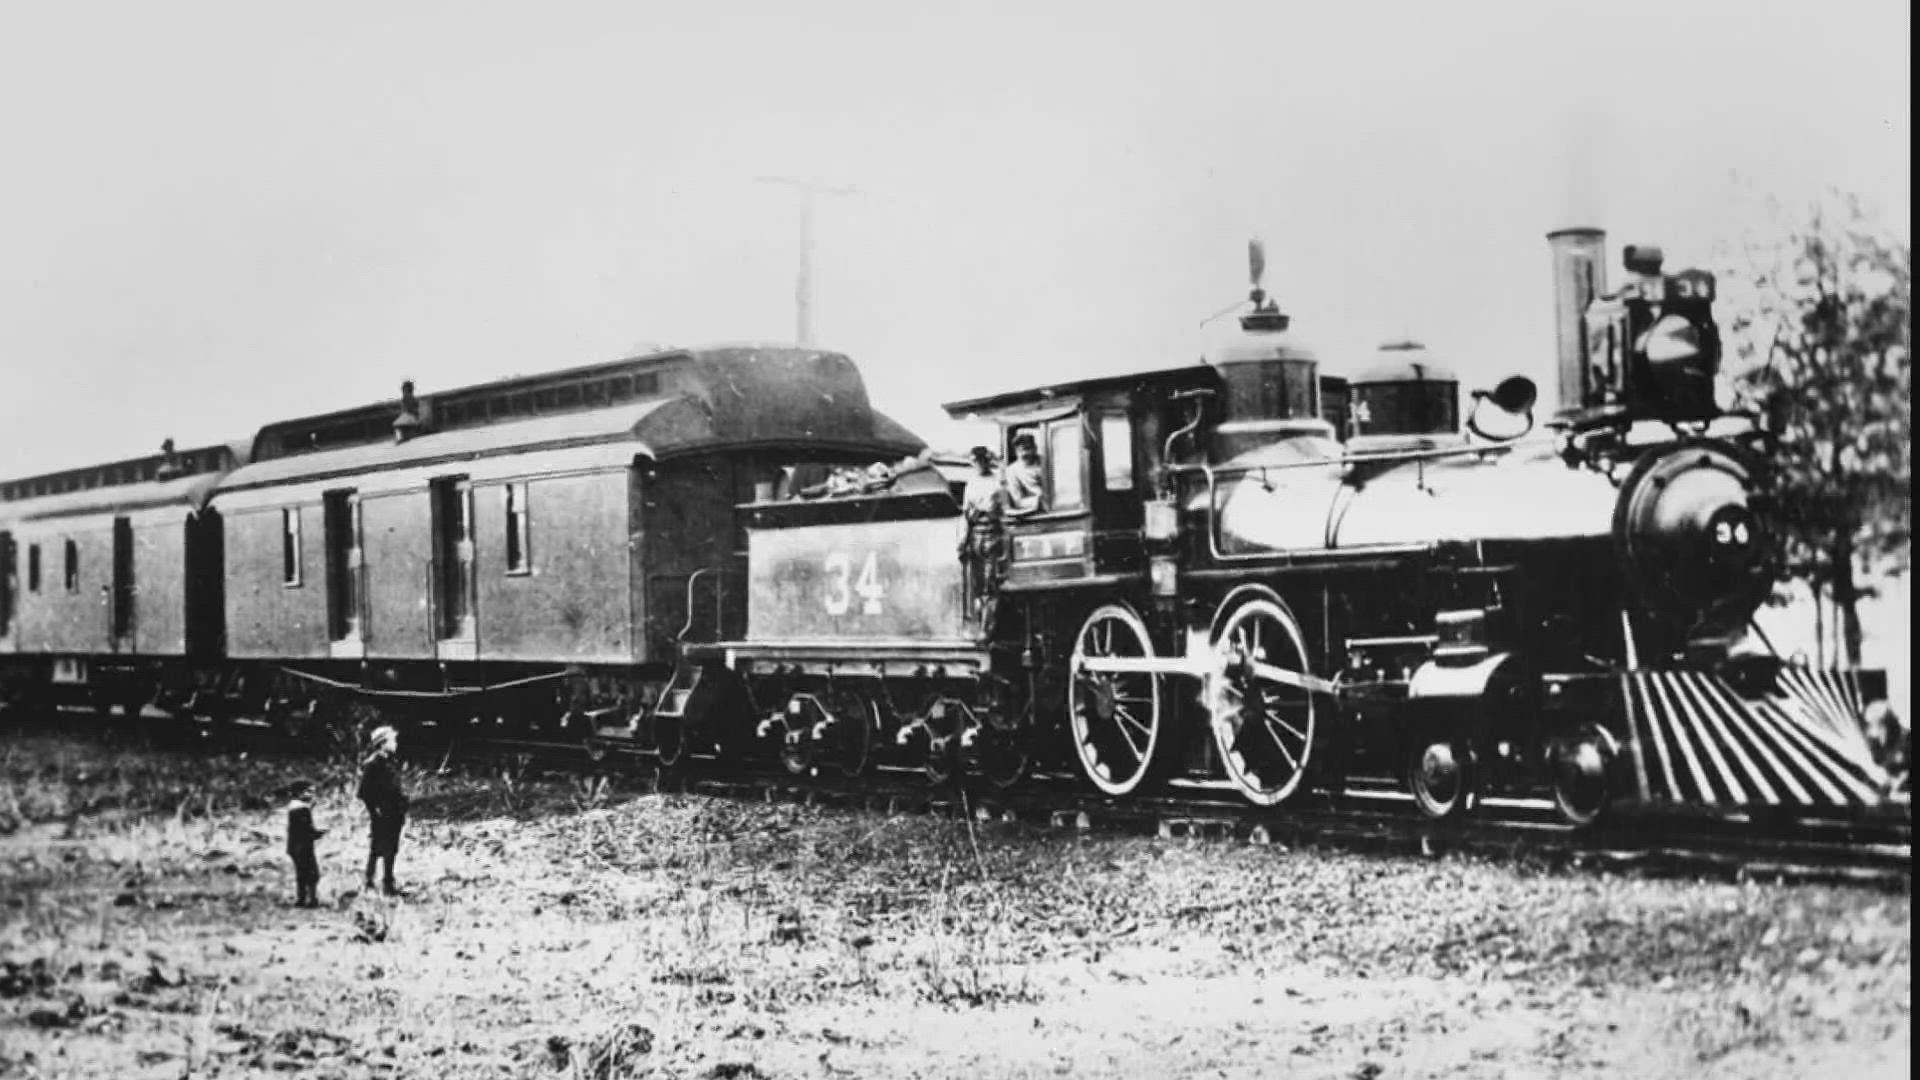 The History of Railroads in Texas